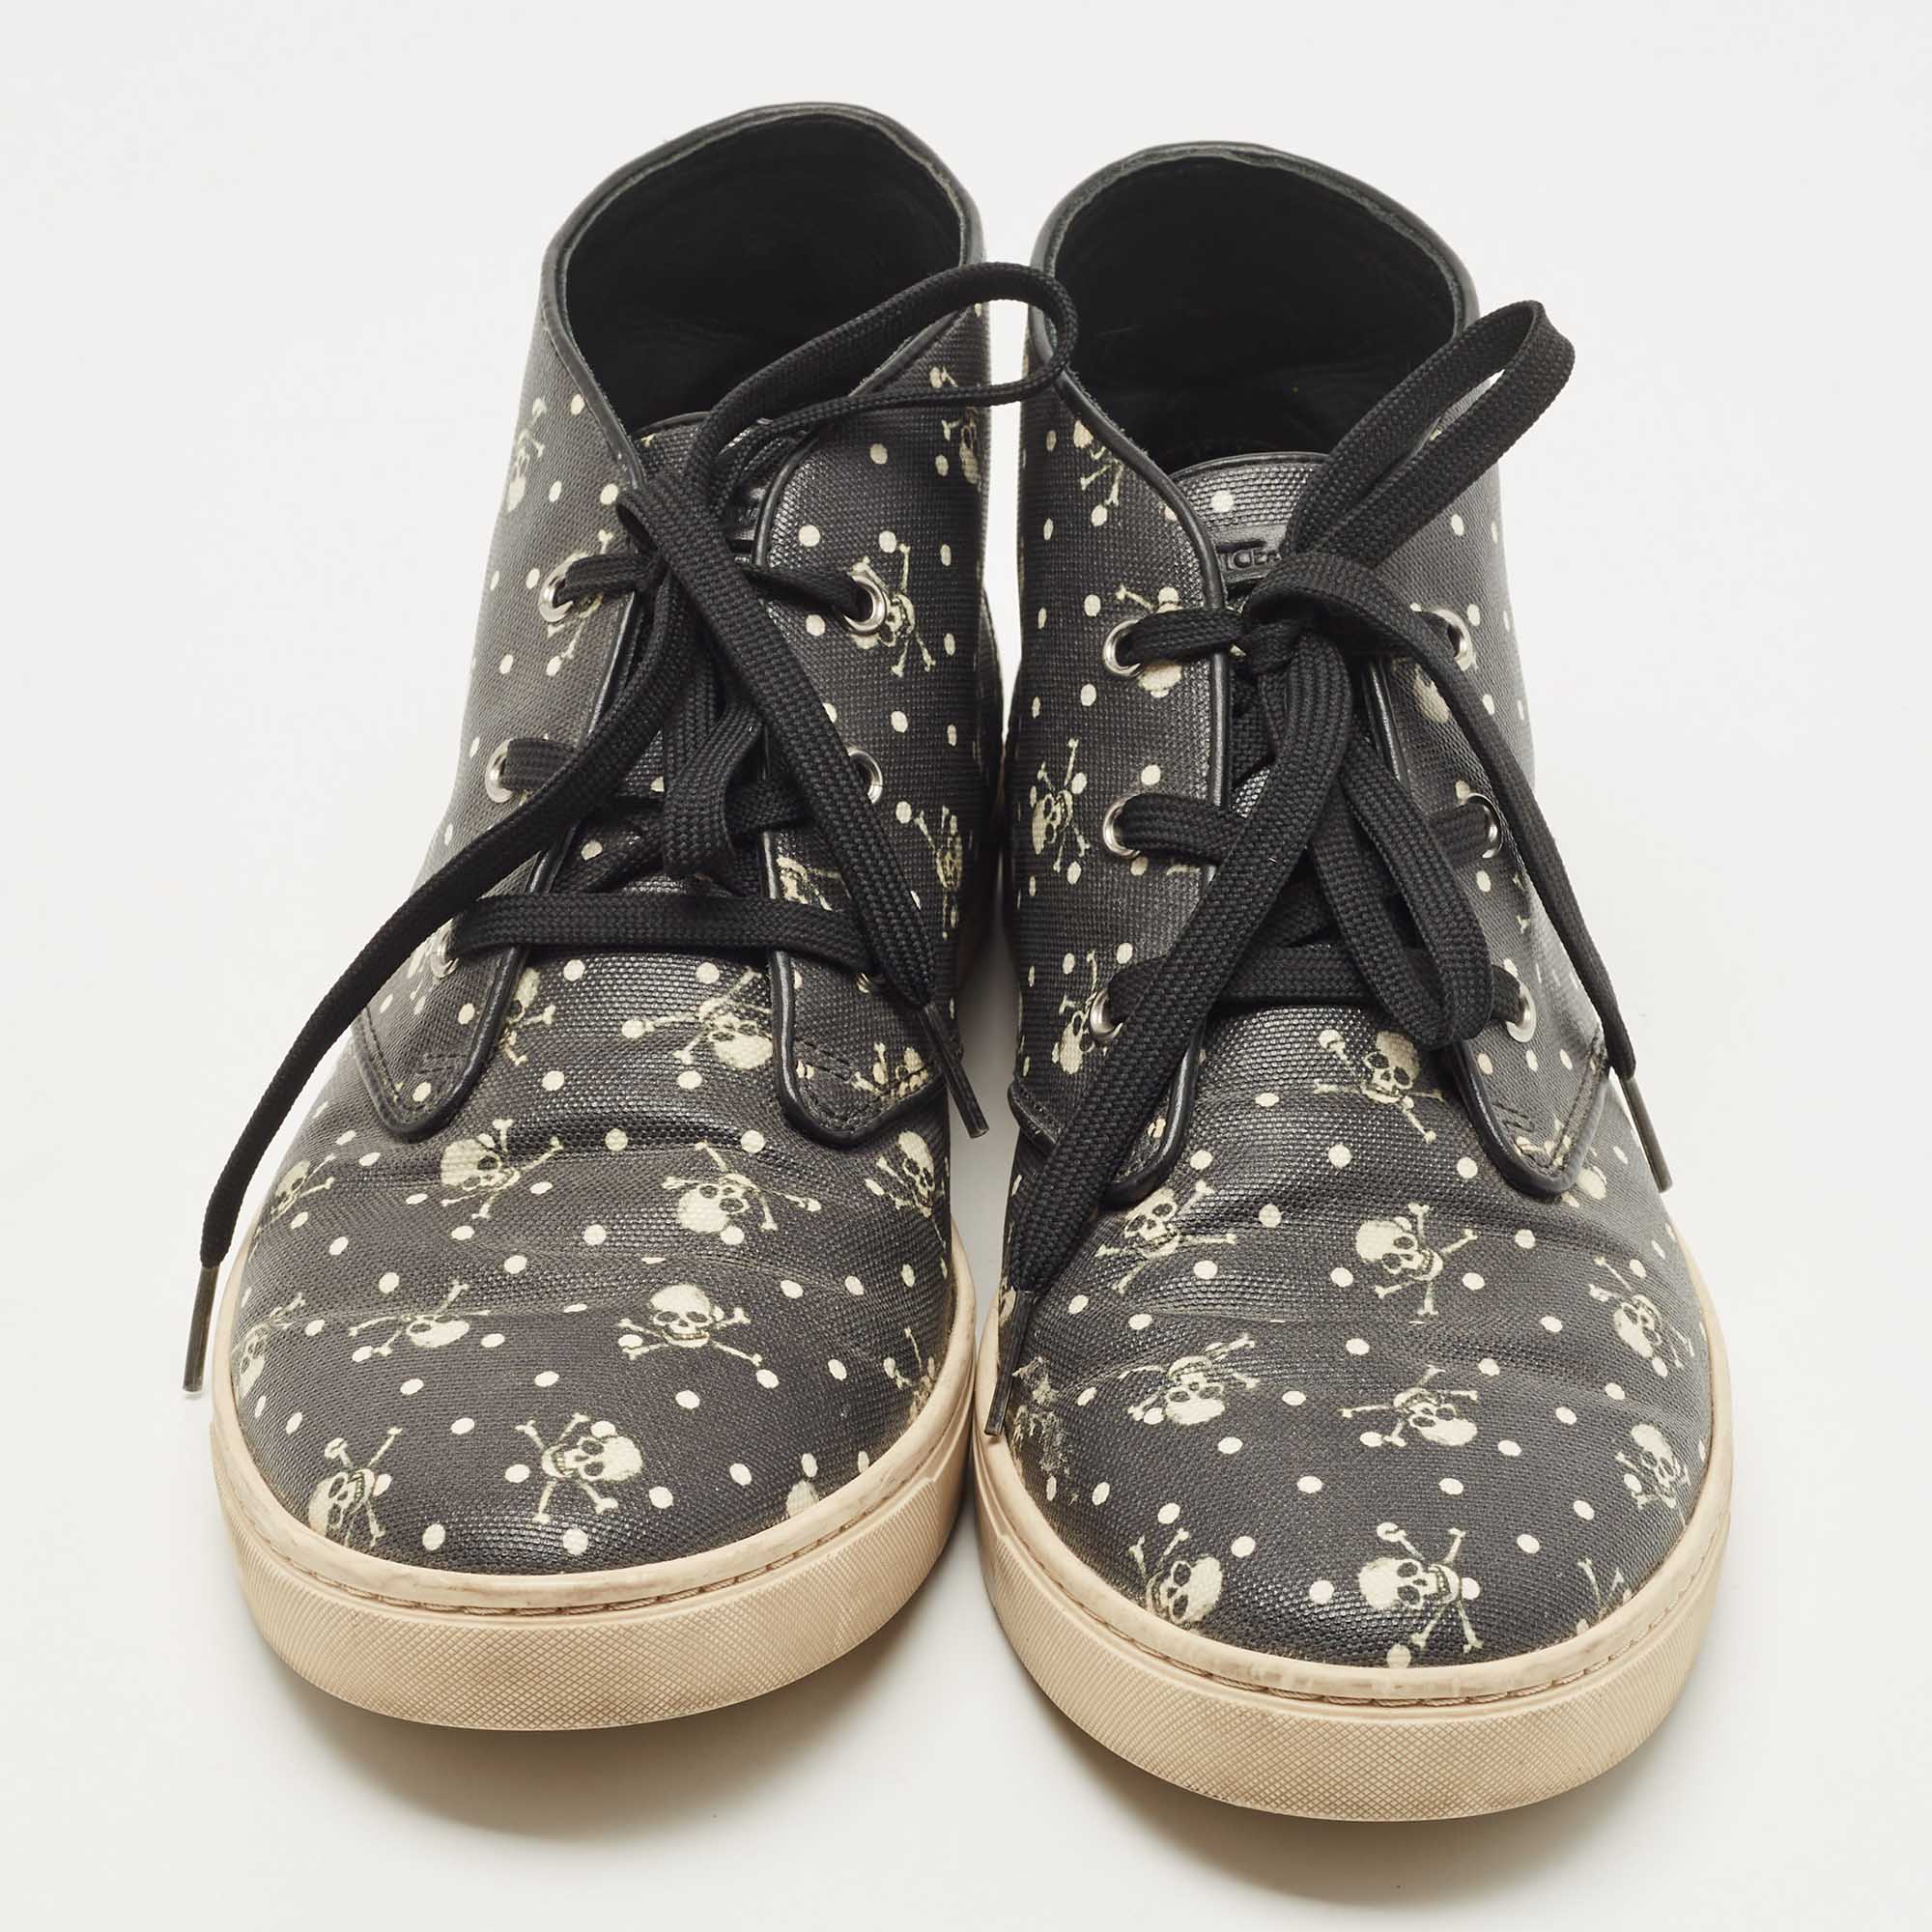 Dolce And Gabbana Black Skull And Cross Bone Print Coated Canvas High Top Sneakers Size 43